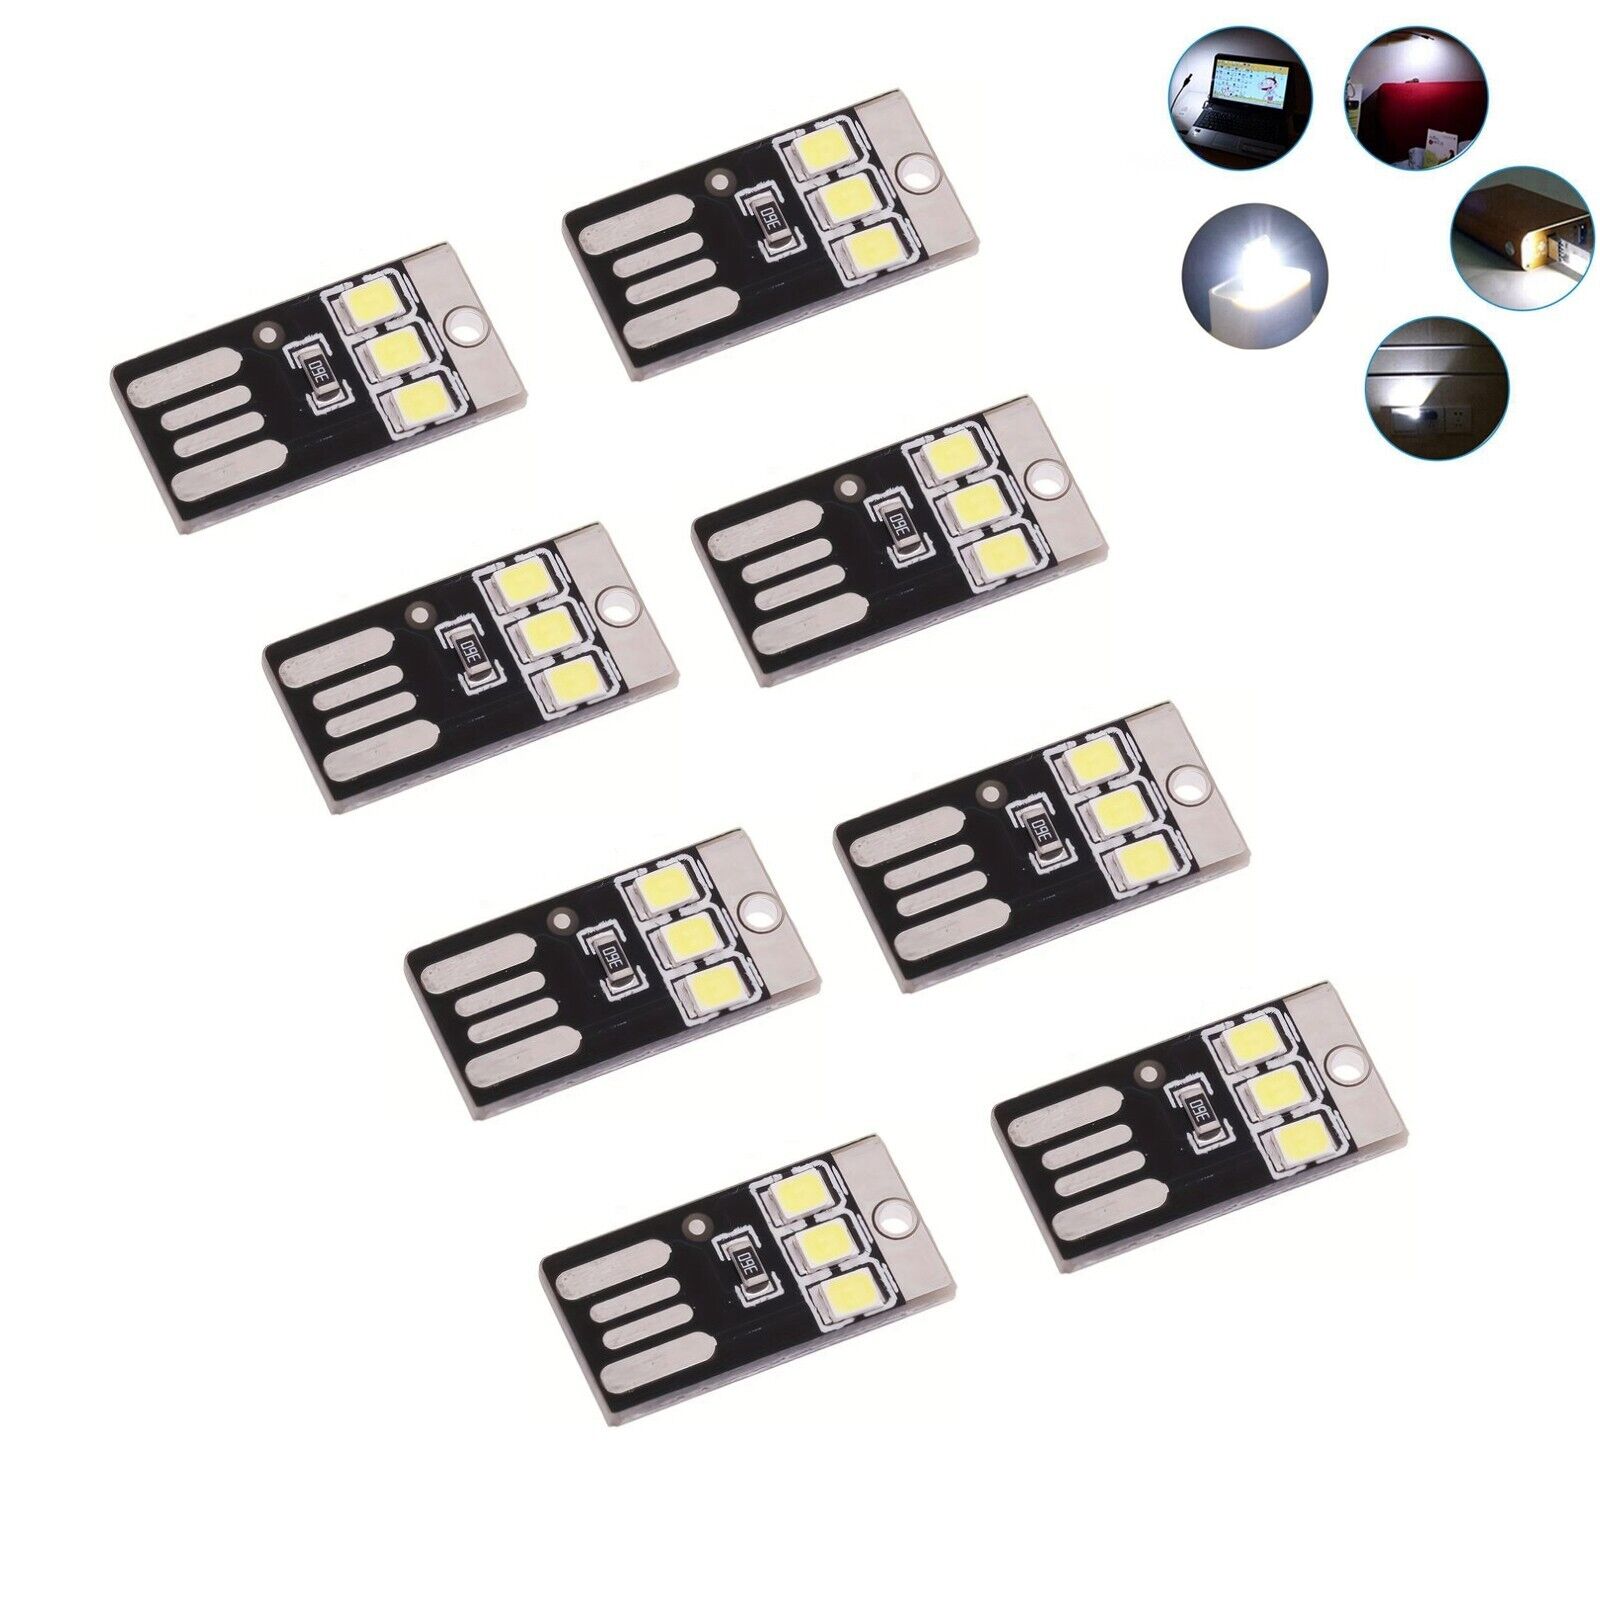 8X Mini Super Bright USB Keyboard Light For Notebook Computer Mobile Power Car